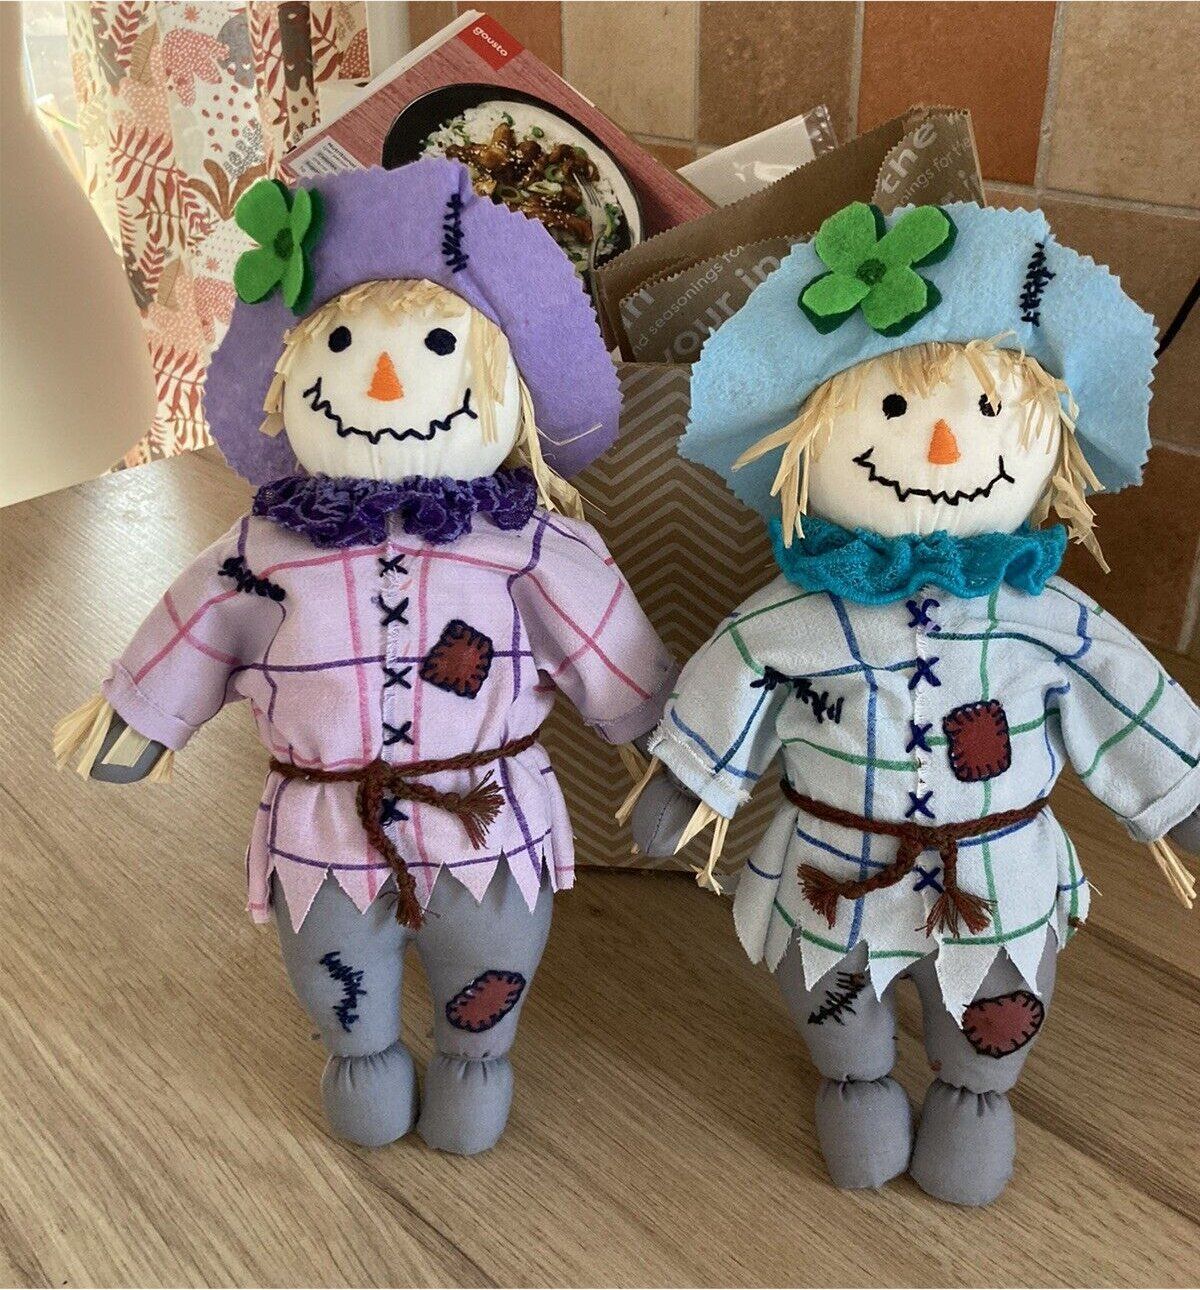 Two scarecrows by Maria